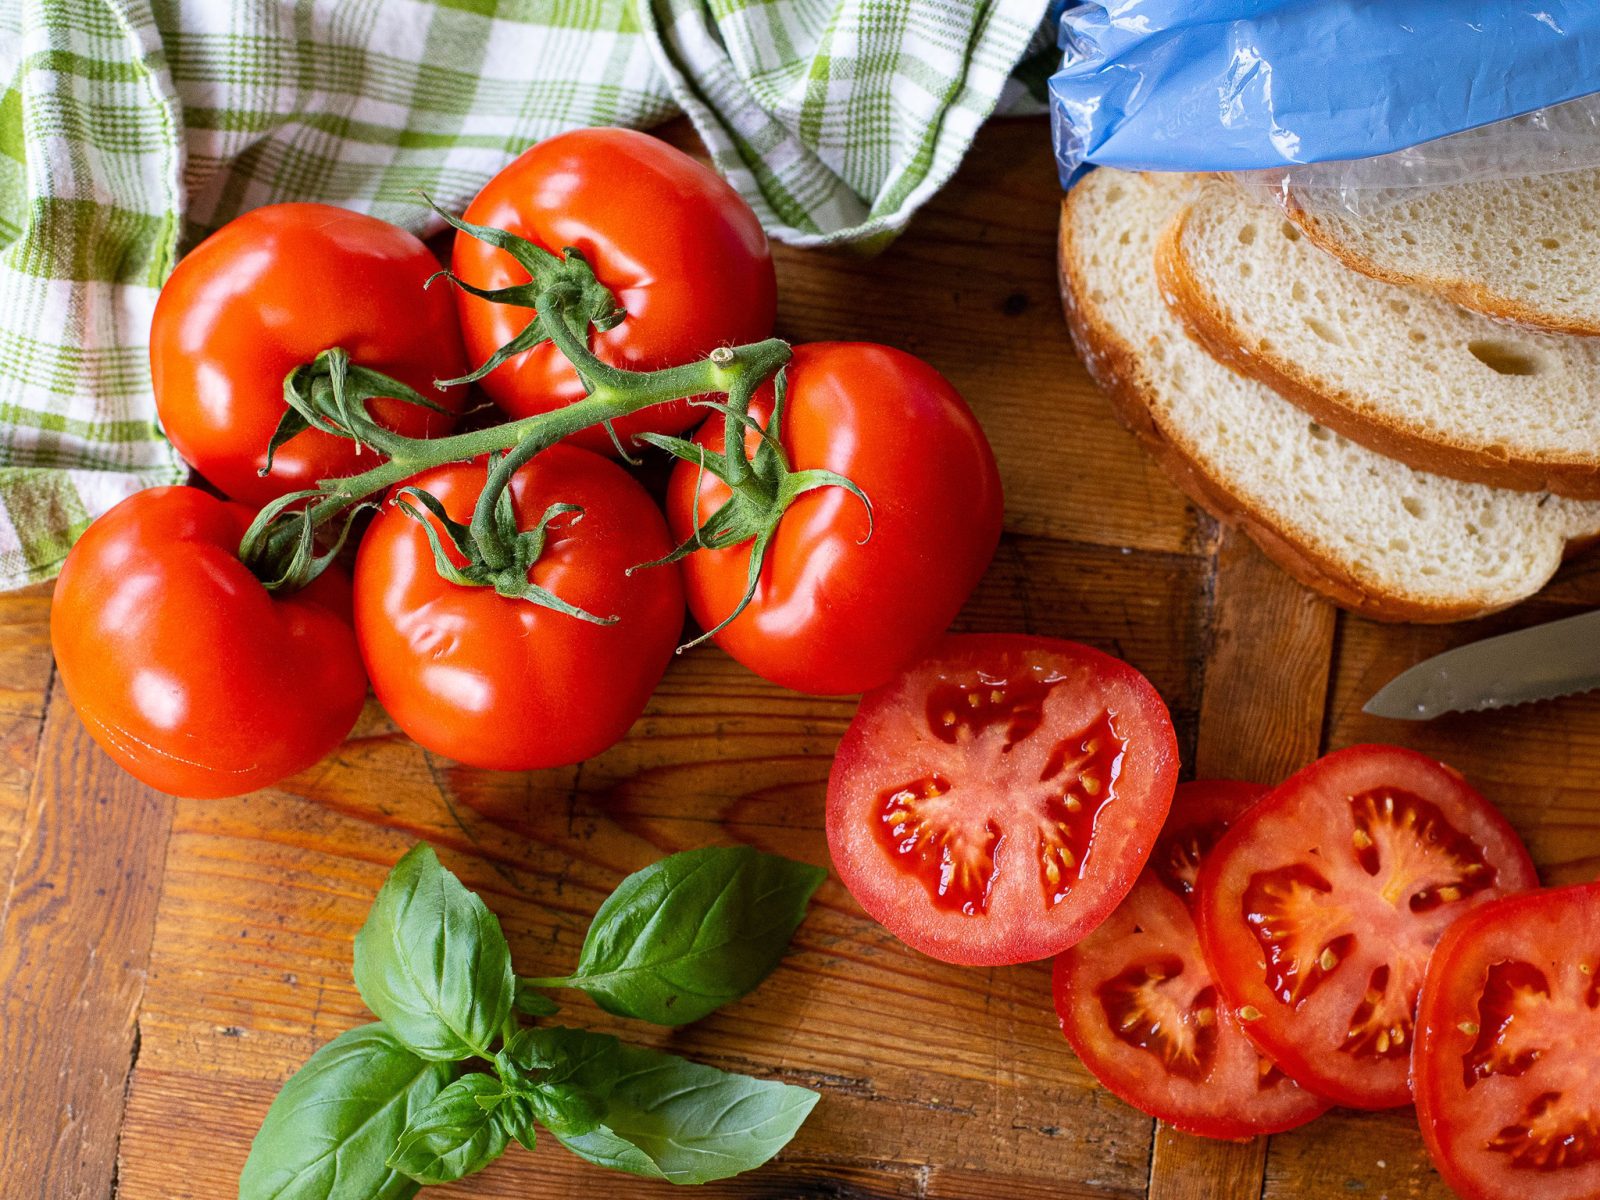 Tomatoes On The Vine Just 77¢ Per Pound At Kroger